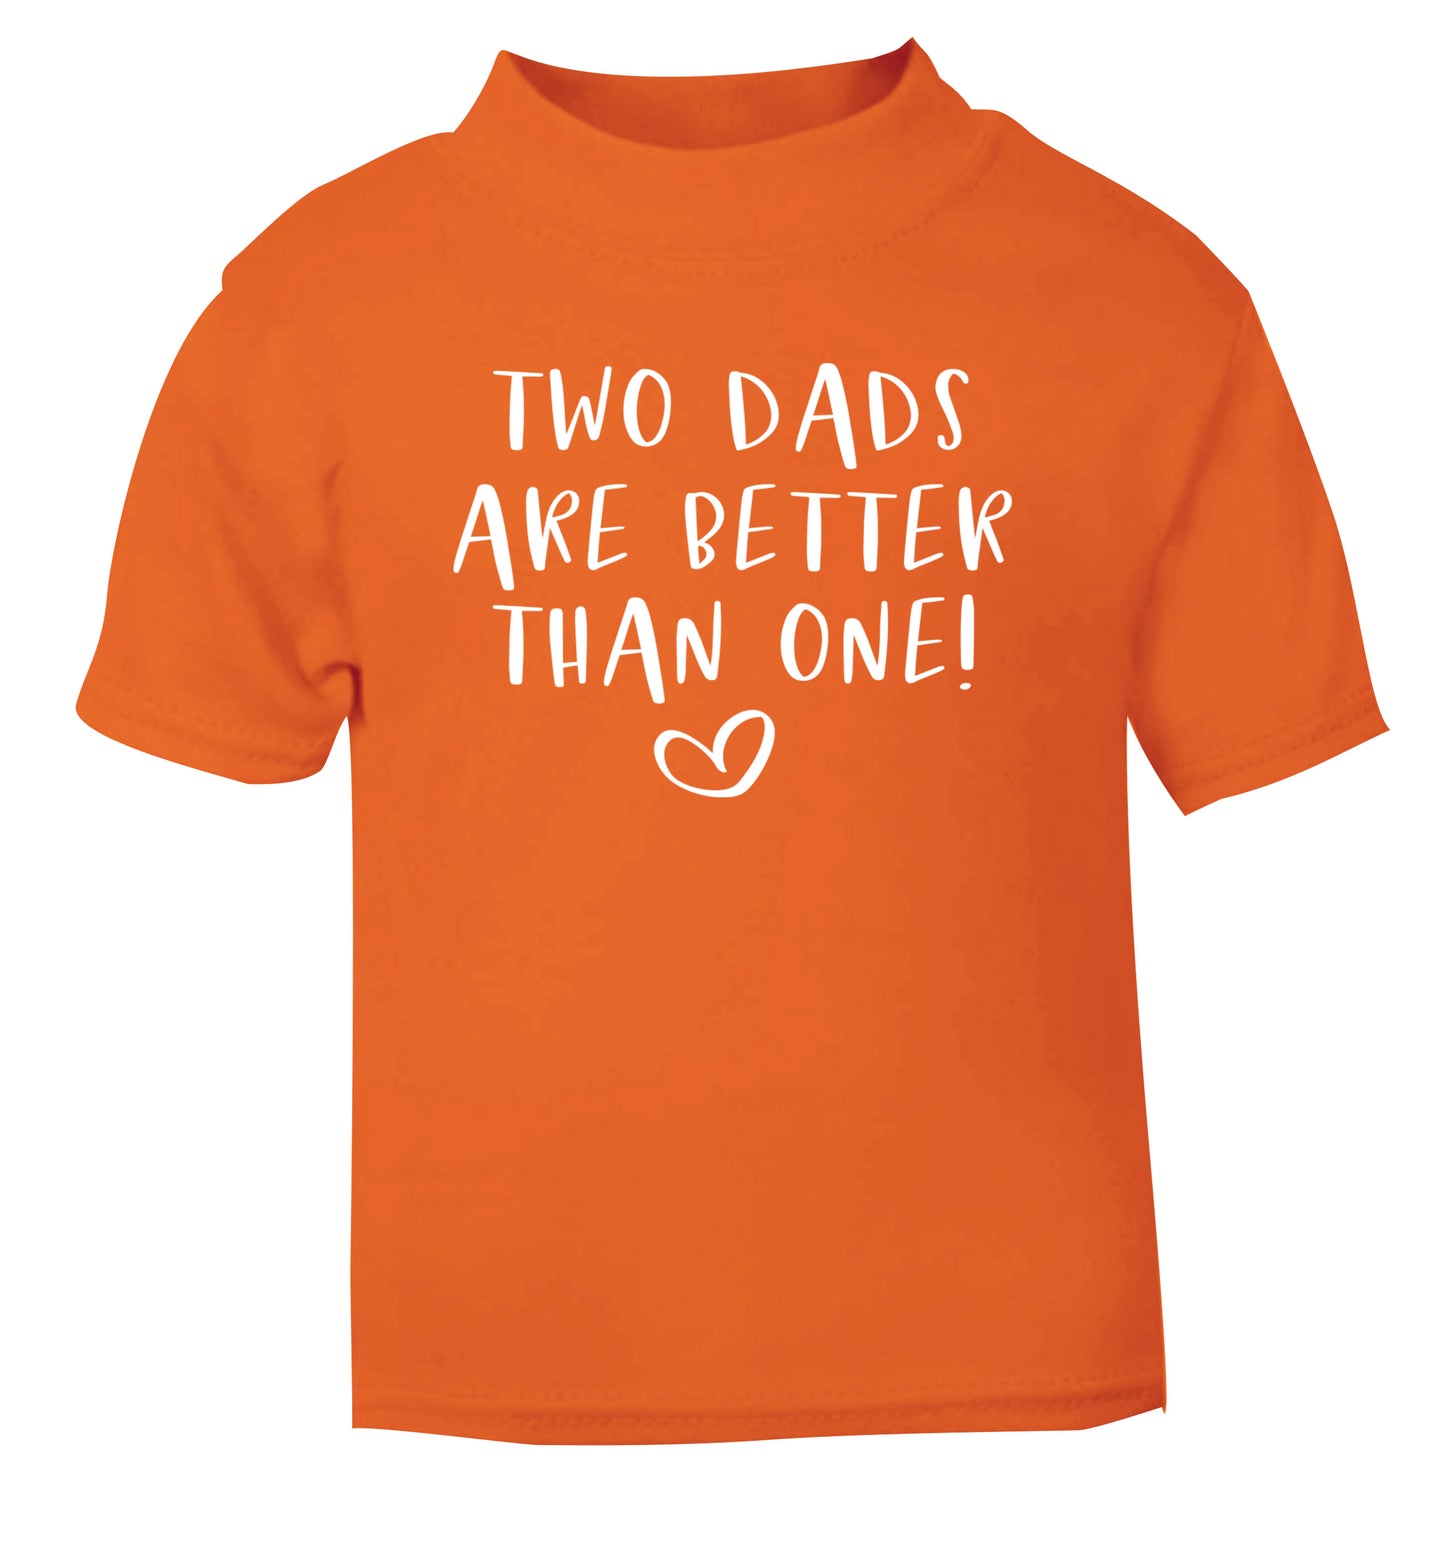 Two dads are better than one orange Baby Toddler Tshirt 2 Years